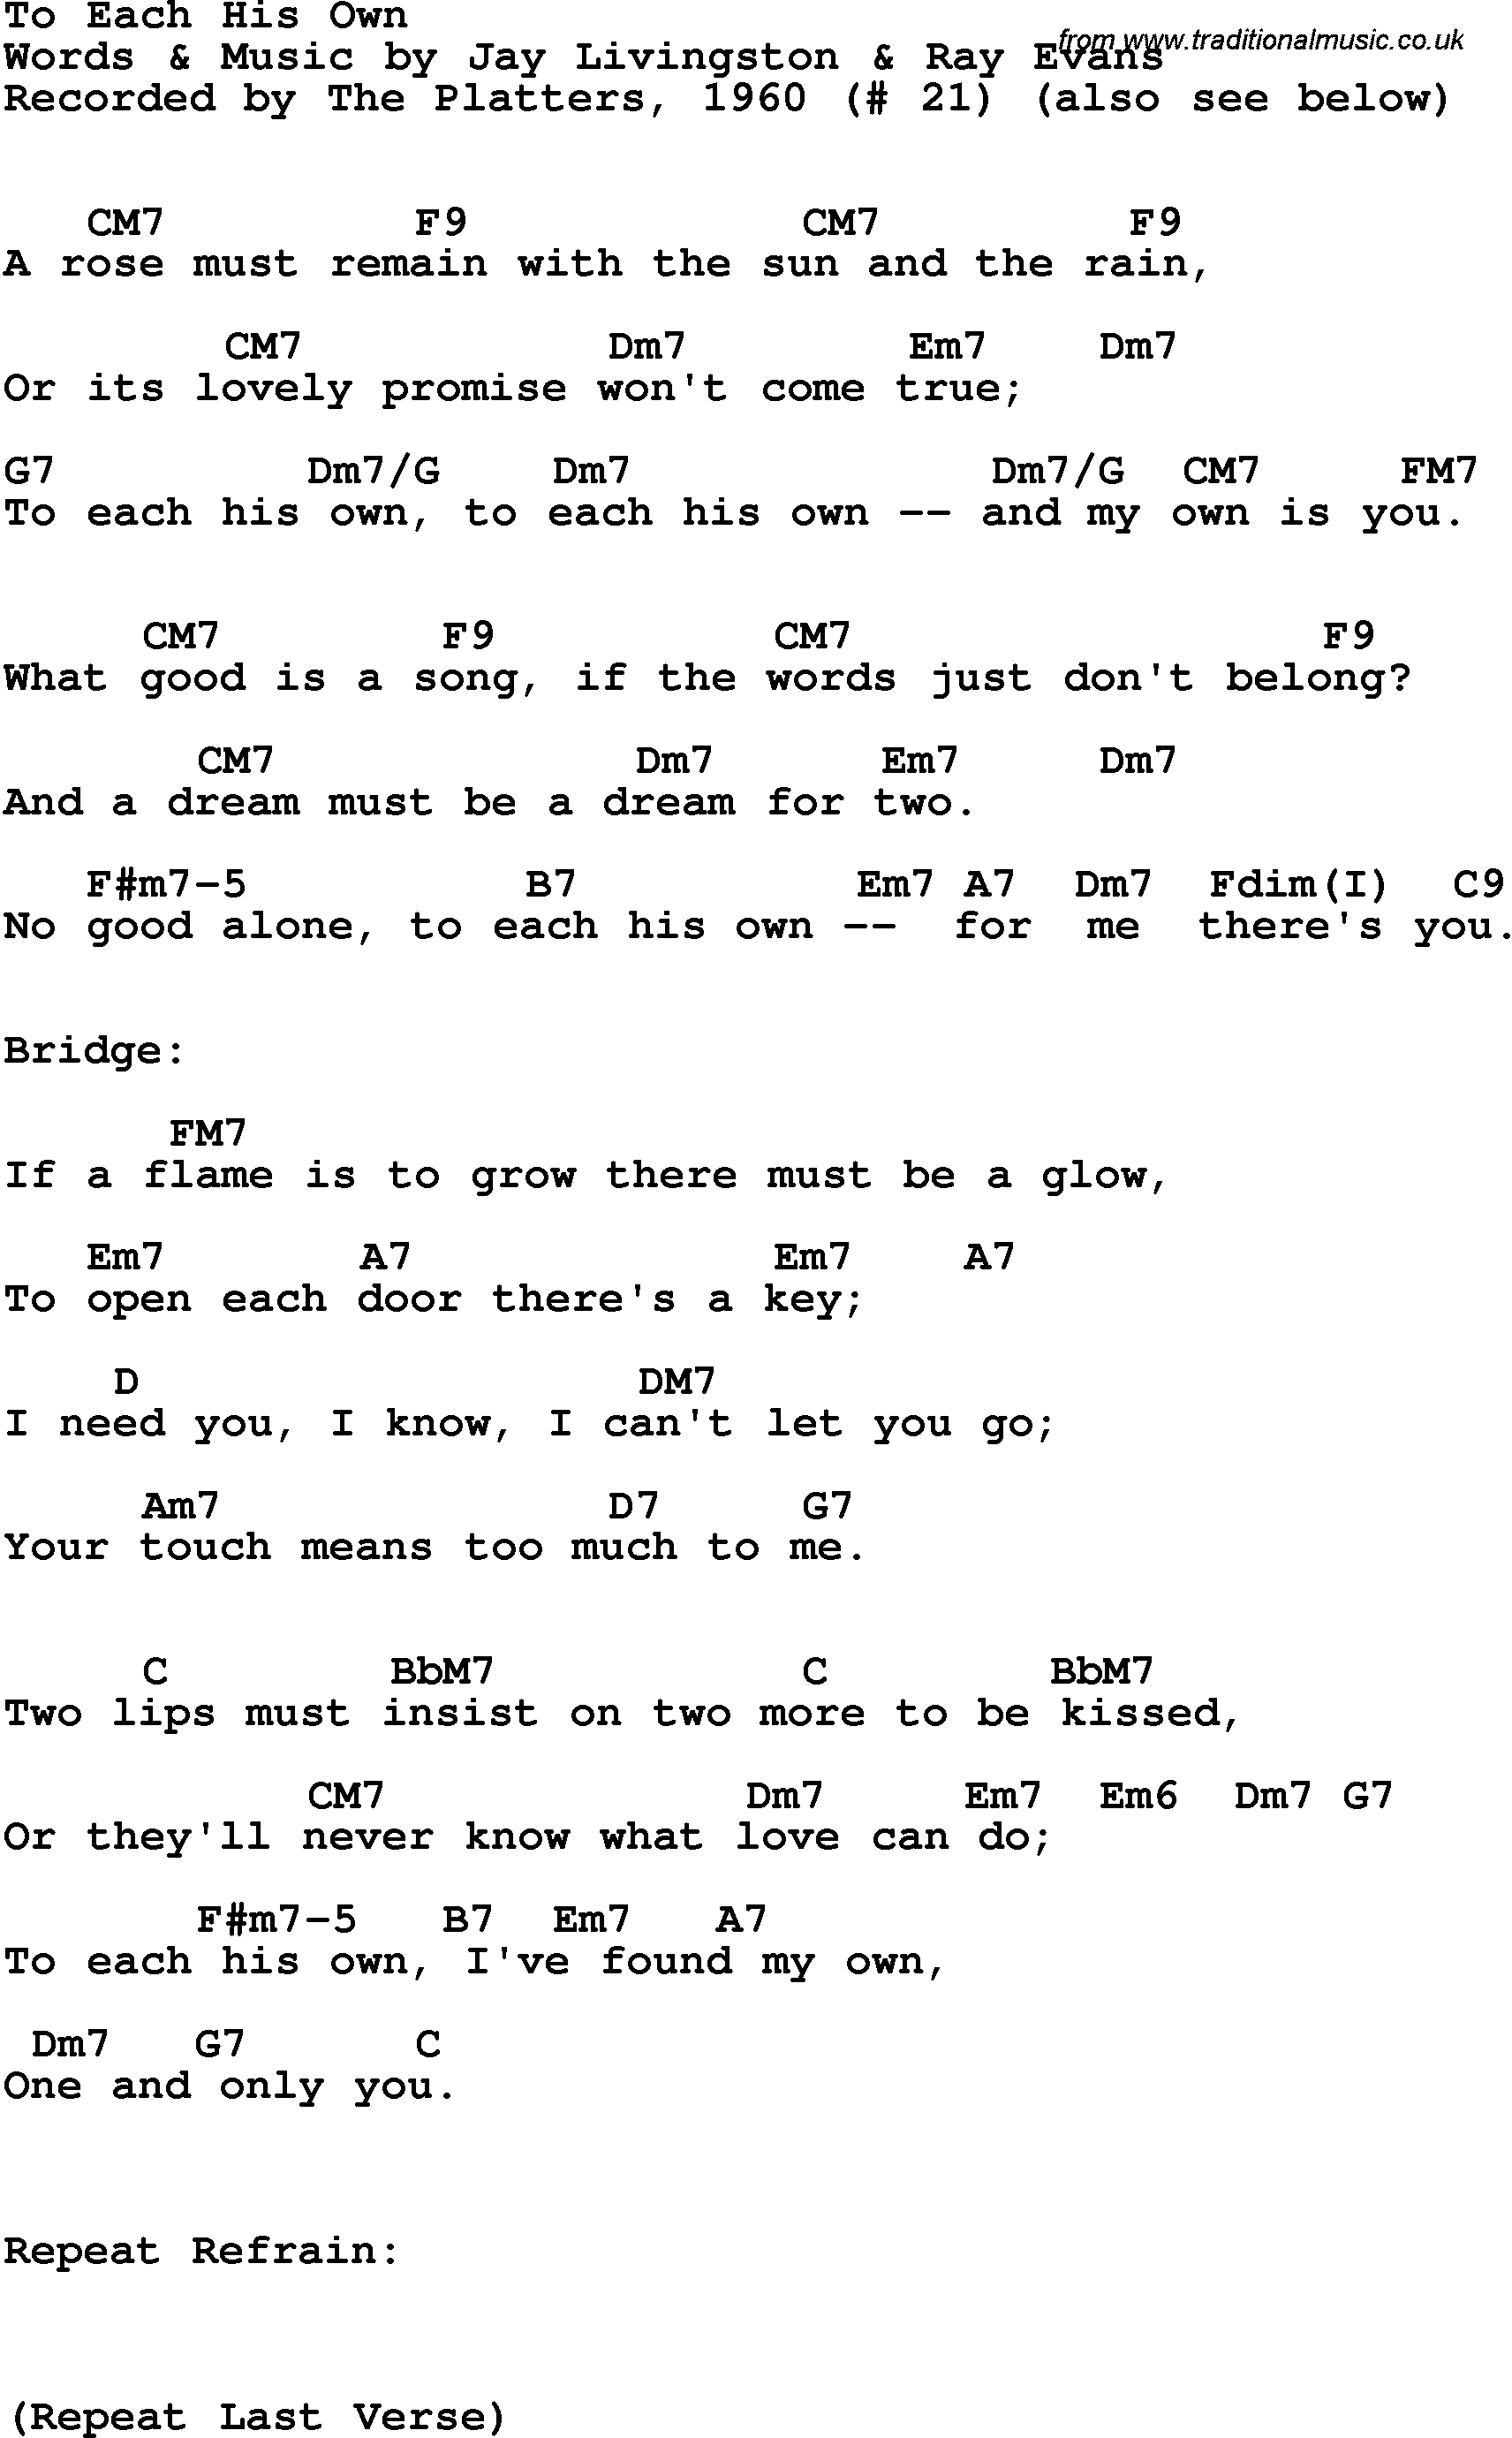 Song Lyrics with guitar chords for To Each His Own - The Platters, 1960